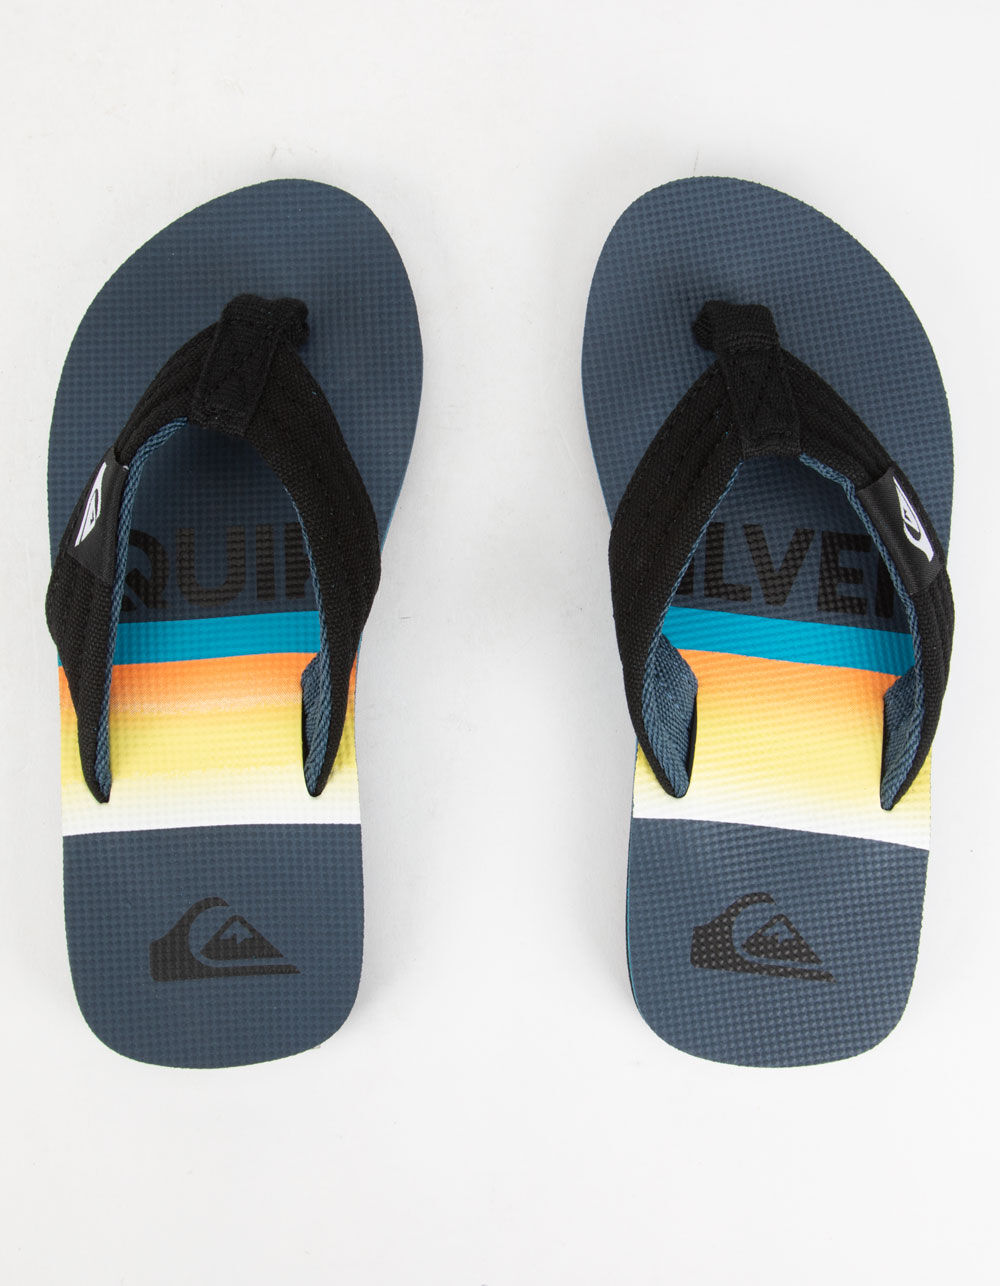 QUIKSILVER Molokai Layback Boys Sandals image number 1